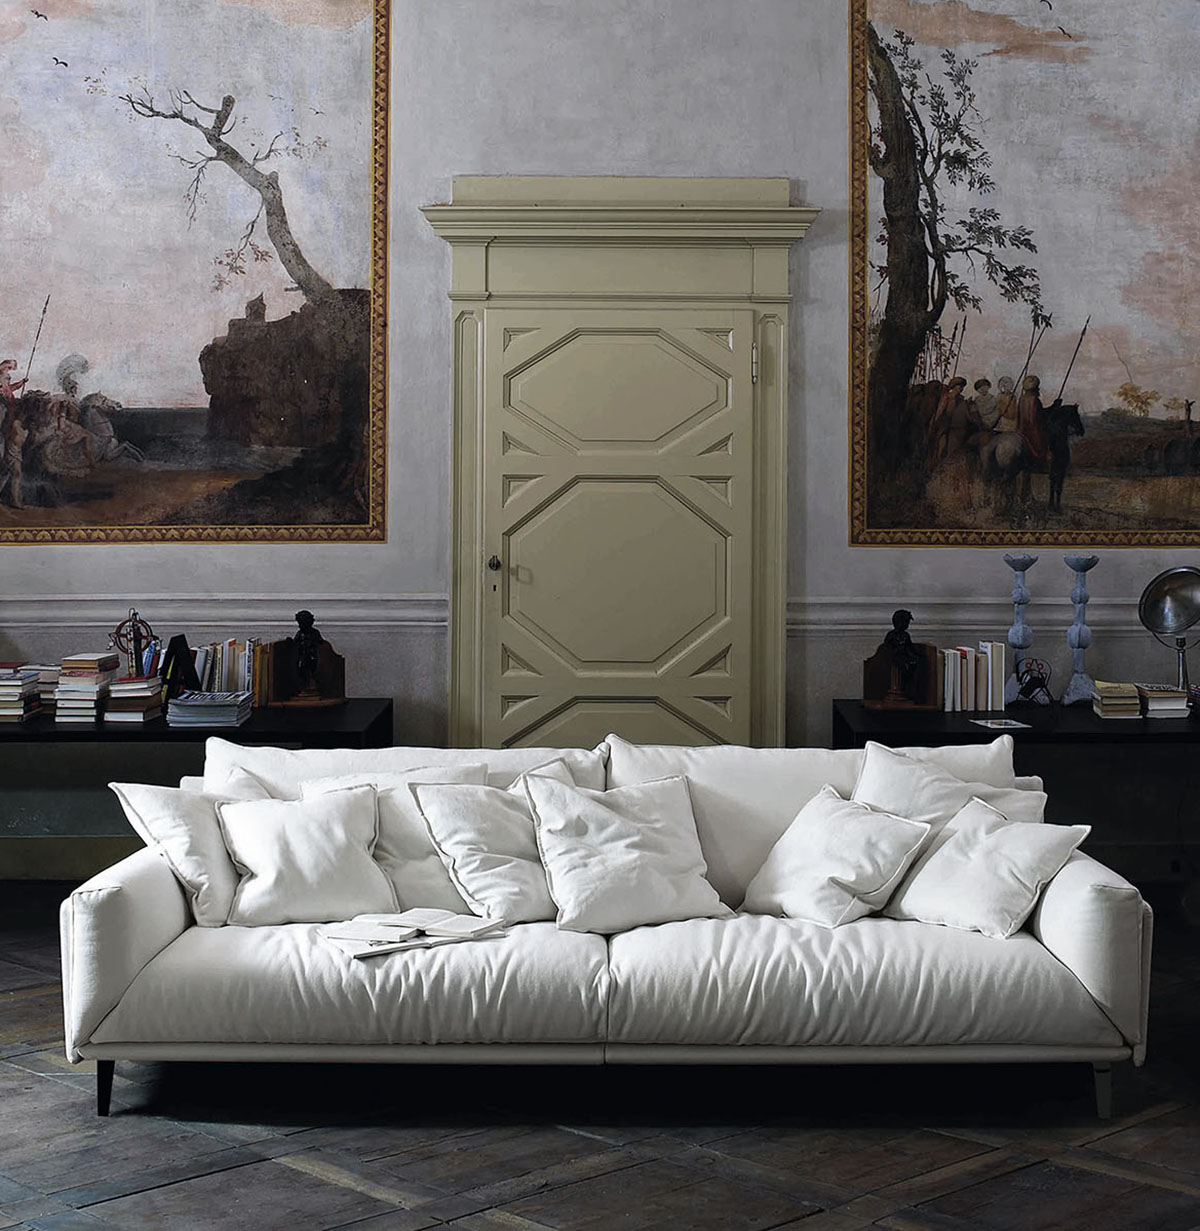 arflex-Faubourg-sofa-design-Carlo-Colombo-fabric-leather-living-hospitality-project-luxury-twoseats-threeseats-madeinitaly-removablecover-modern-contemporary